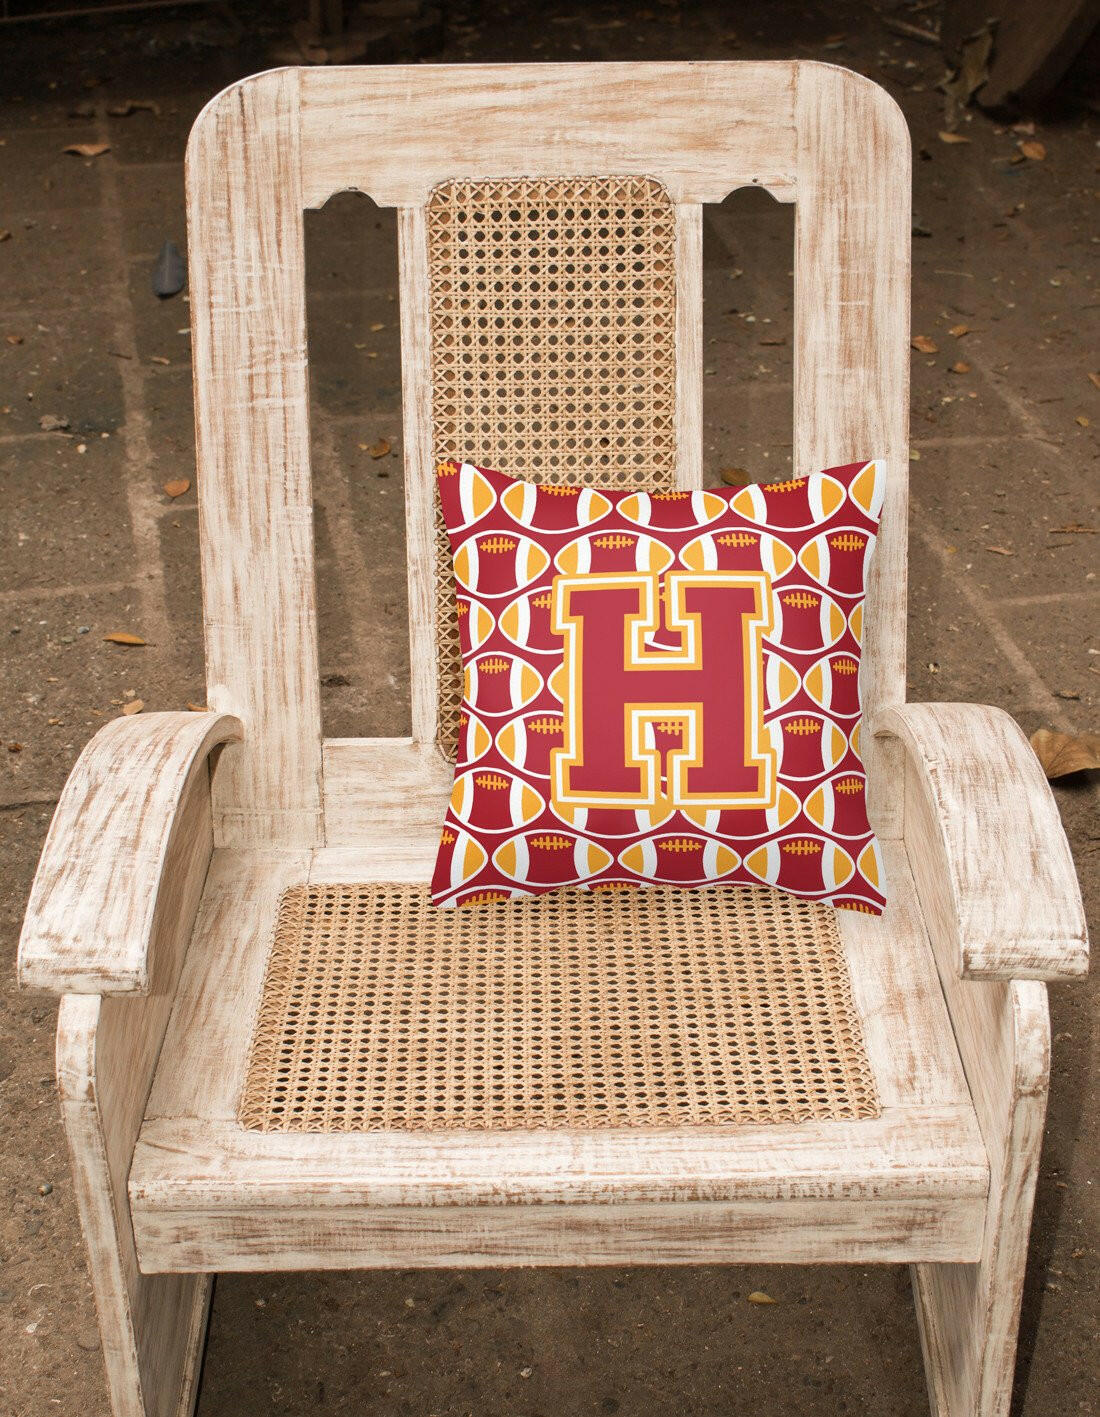 Letter H Football Cardinal and Gold Fabric Decorative Pillow CJ1070-HPW1414 by Caroline's Treasures